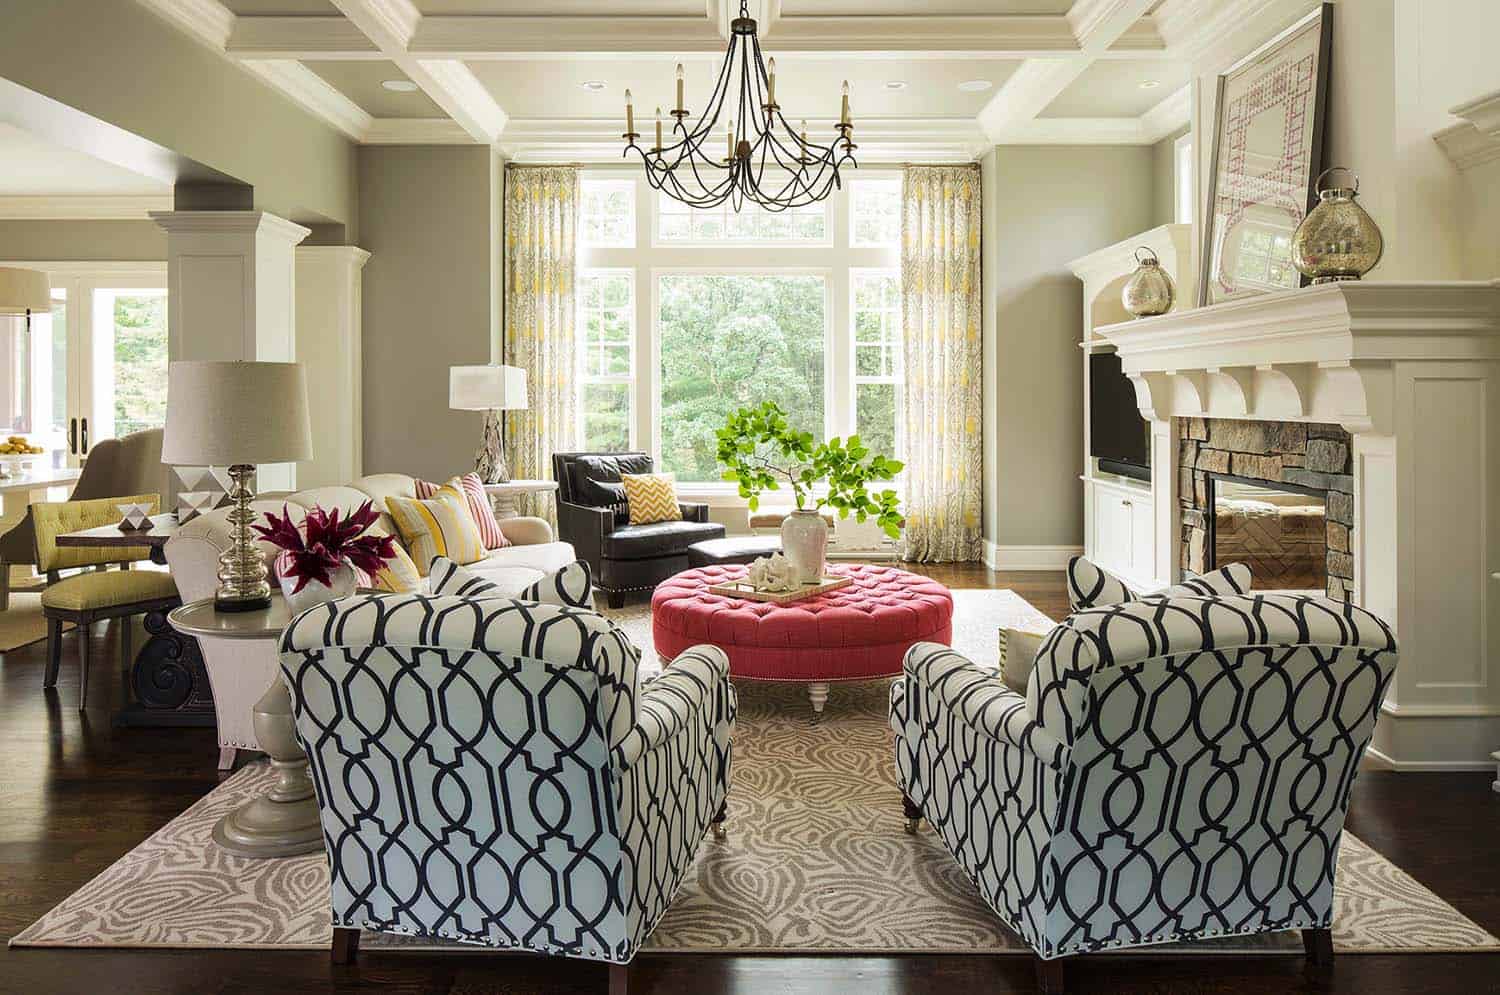 Sophisticated elegance in a gorgeous Minnesota home